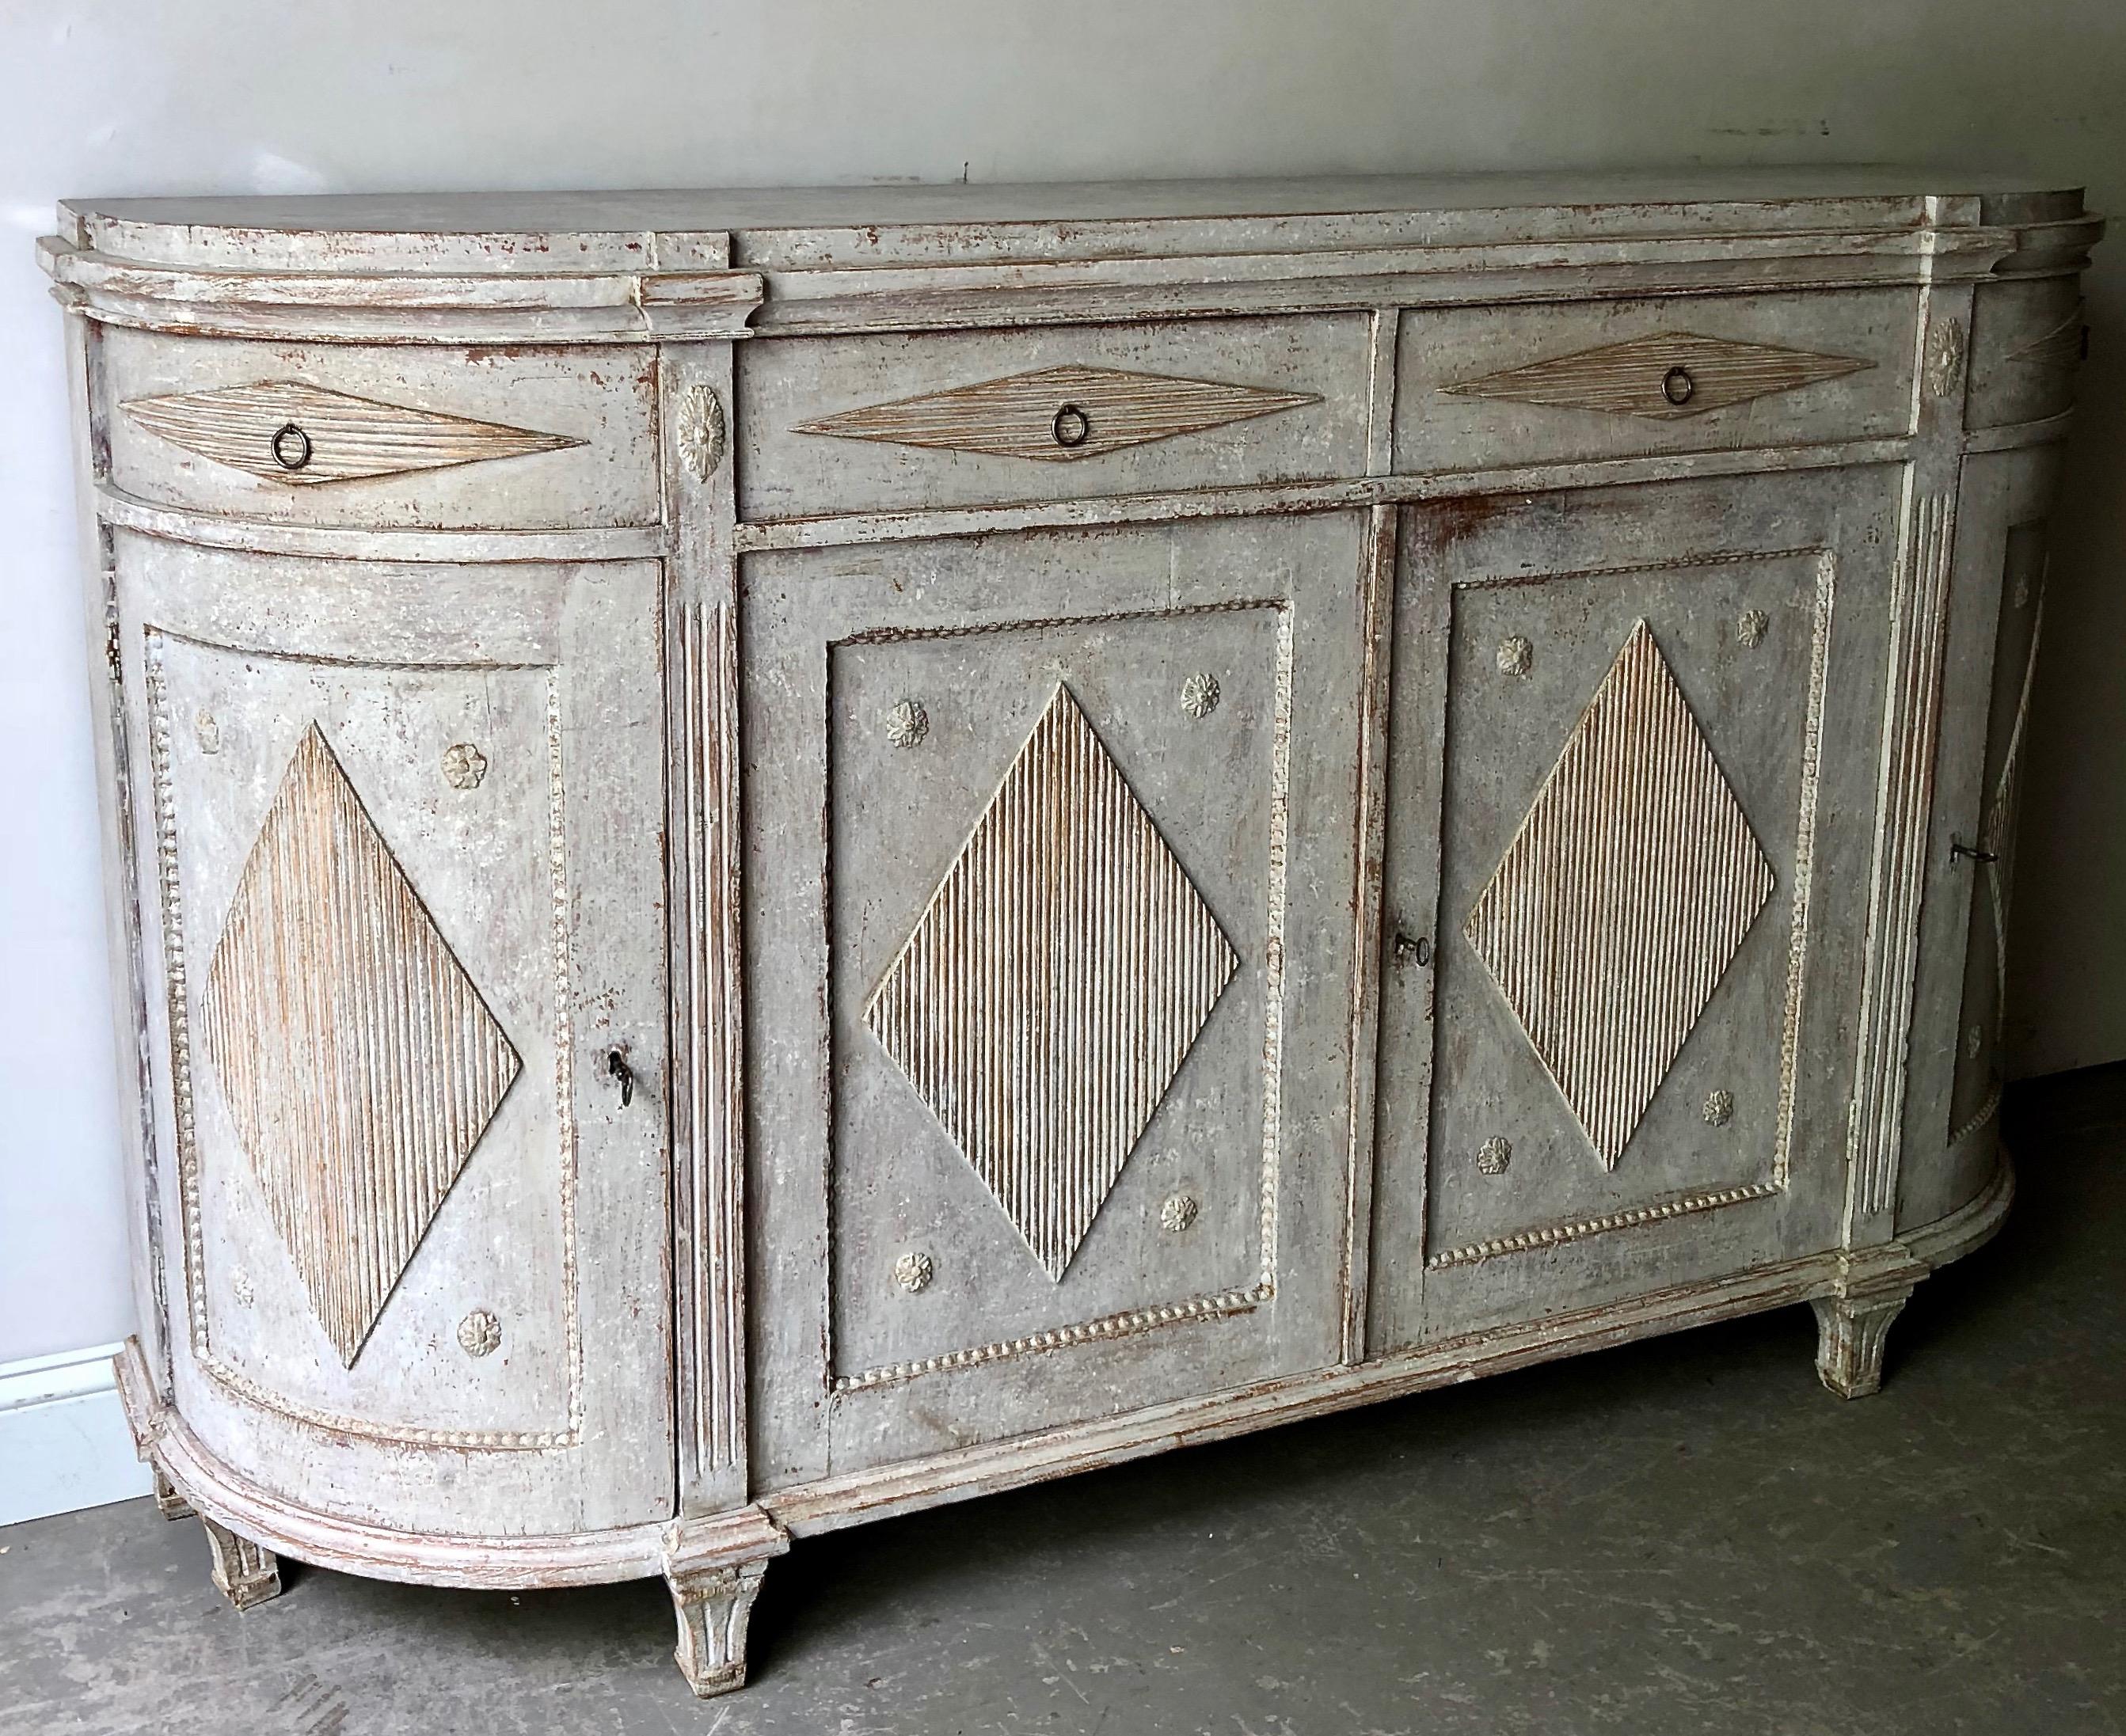 Very large, early 19th century Swedish period Gustavian sideboard in classic Gustavian manor; rounded form with reeded corner posts, four paneled doors with reeded diamond shaped lozenges and four drawers for storage, all resting on short reeded